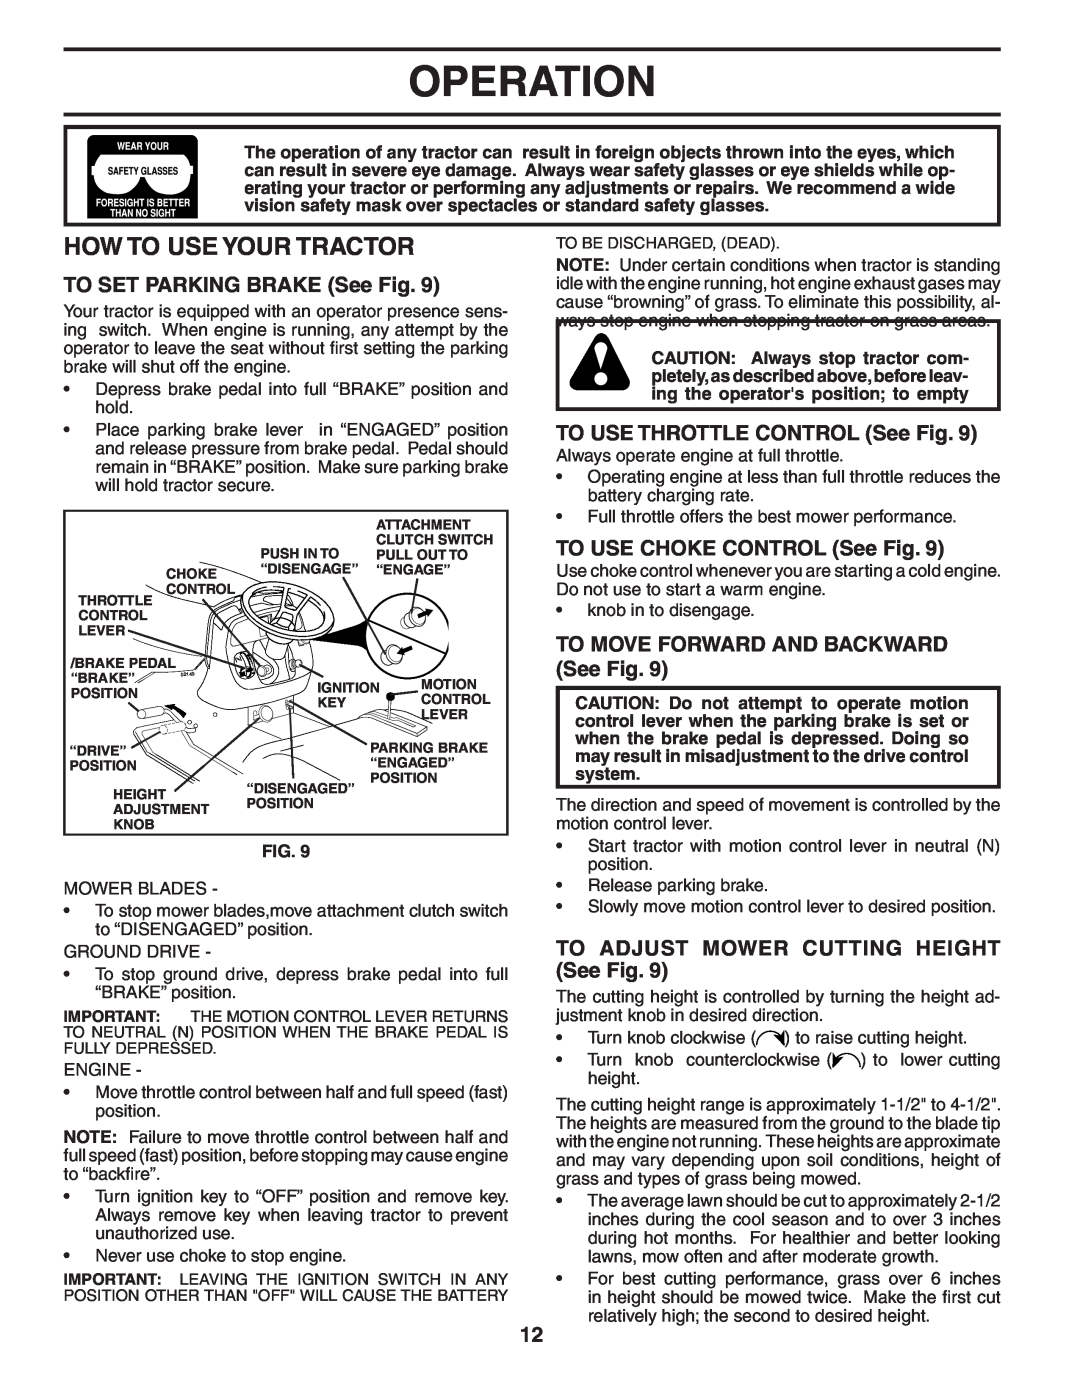 Poulan PKGTH2554 manual How To Use Your Tractor, TO SET PARKING BRAKE See Fig, TO USE THROTTLE CONTROL See Fig, Operation 